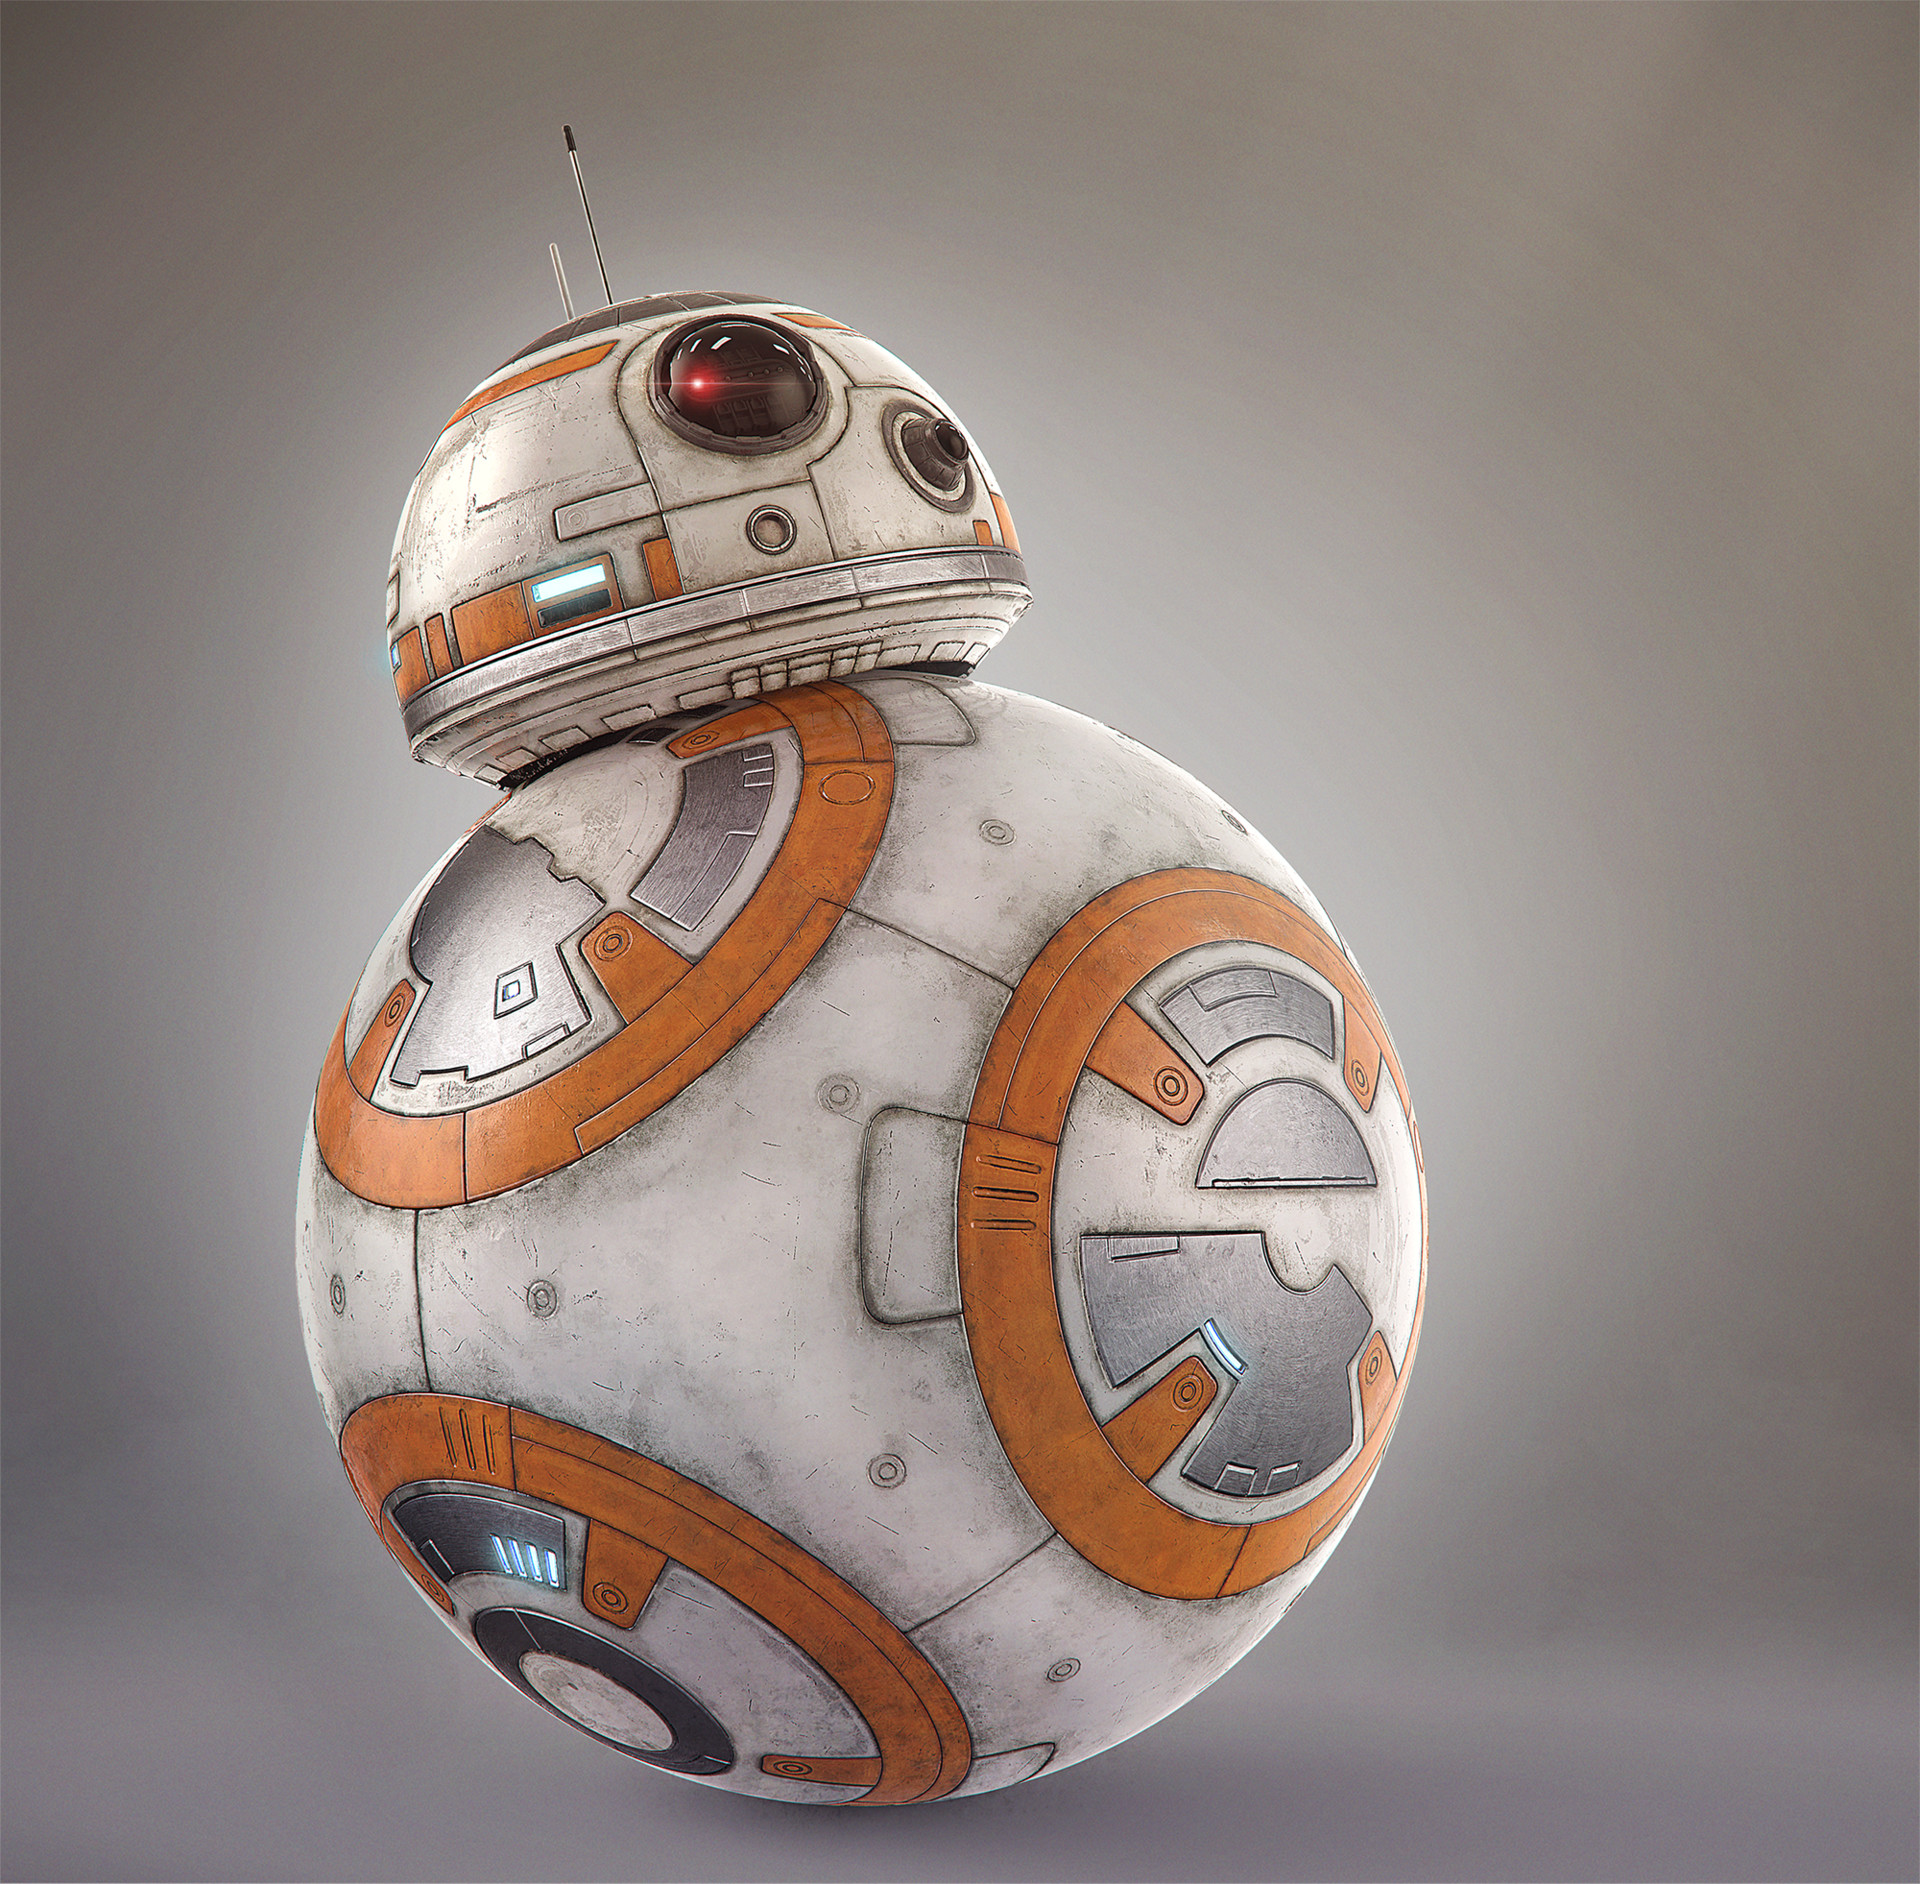 You can purchase the model here: https://www.turbosquid.com/3d-models/bb-8-bb...